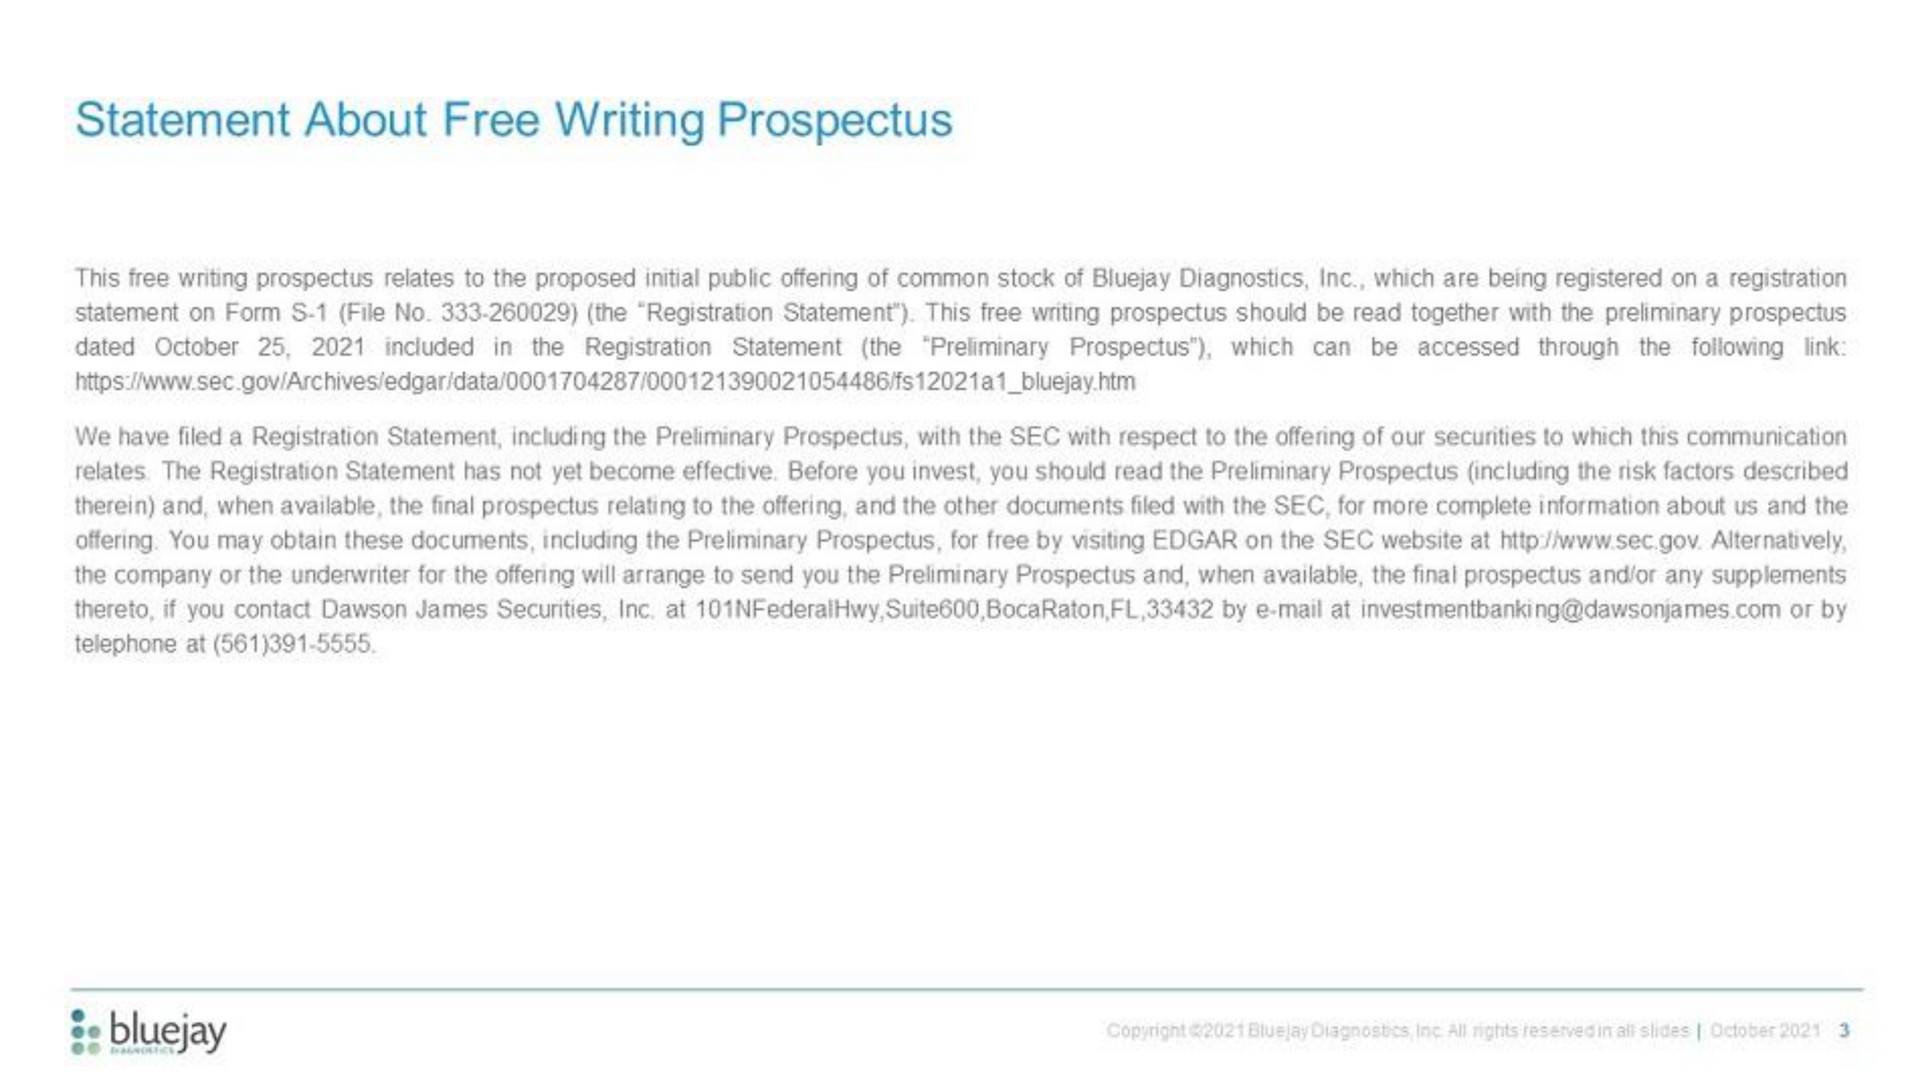 statement about free writing prospectus | Bluejay